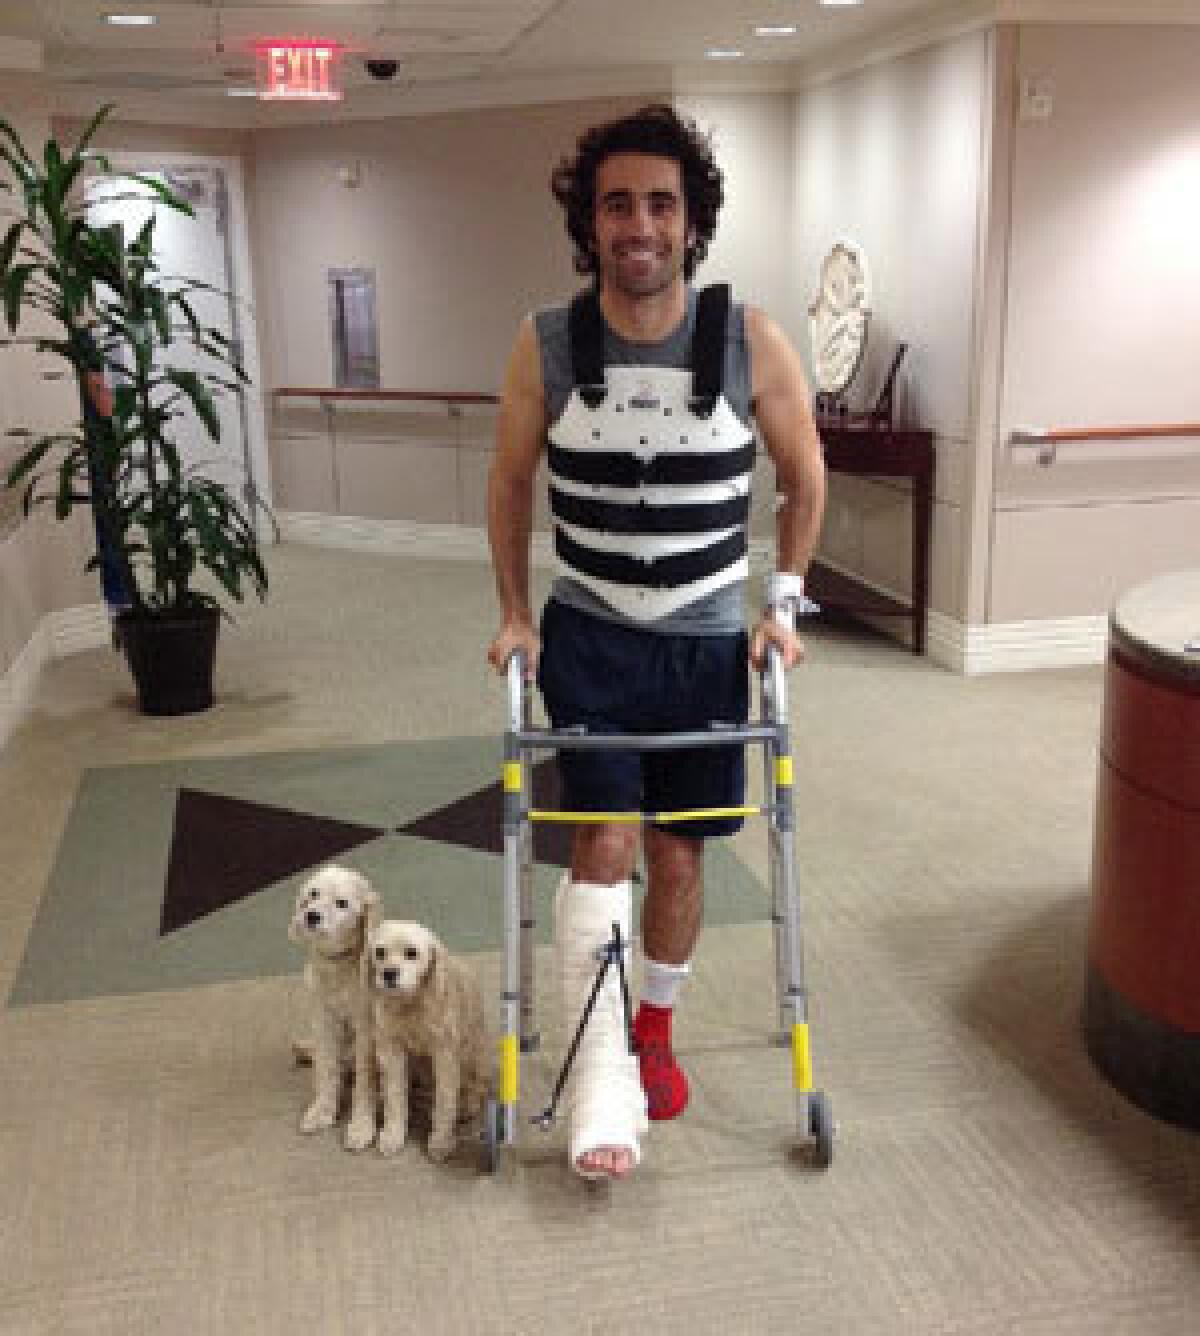 Dario Franchitti poses with his dogs, Shug and Buttermilk, in a photo taken by his brother, Marino Franchitti, at Memorial Hermann-Texas Medical Center in Houston on Oct. 10.